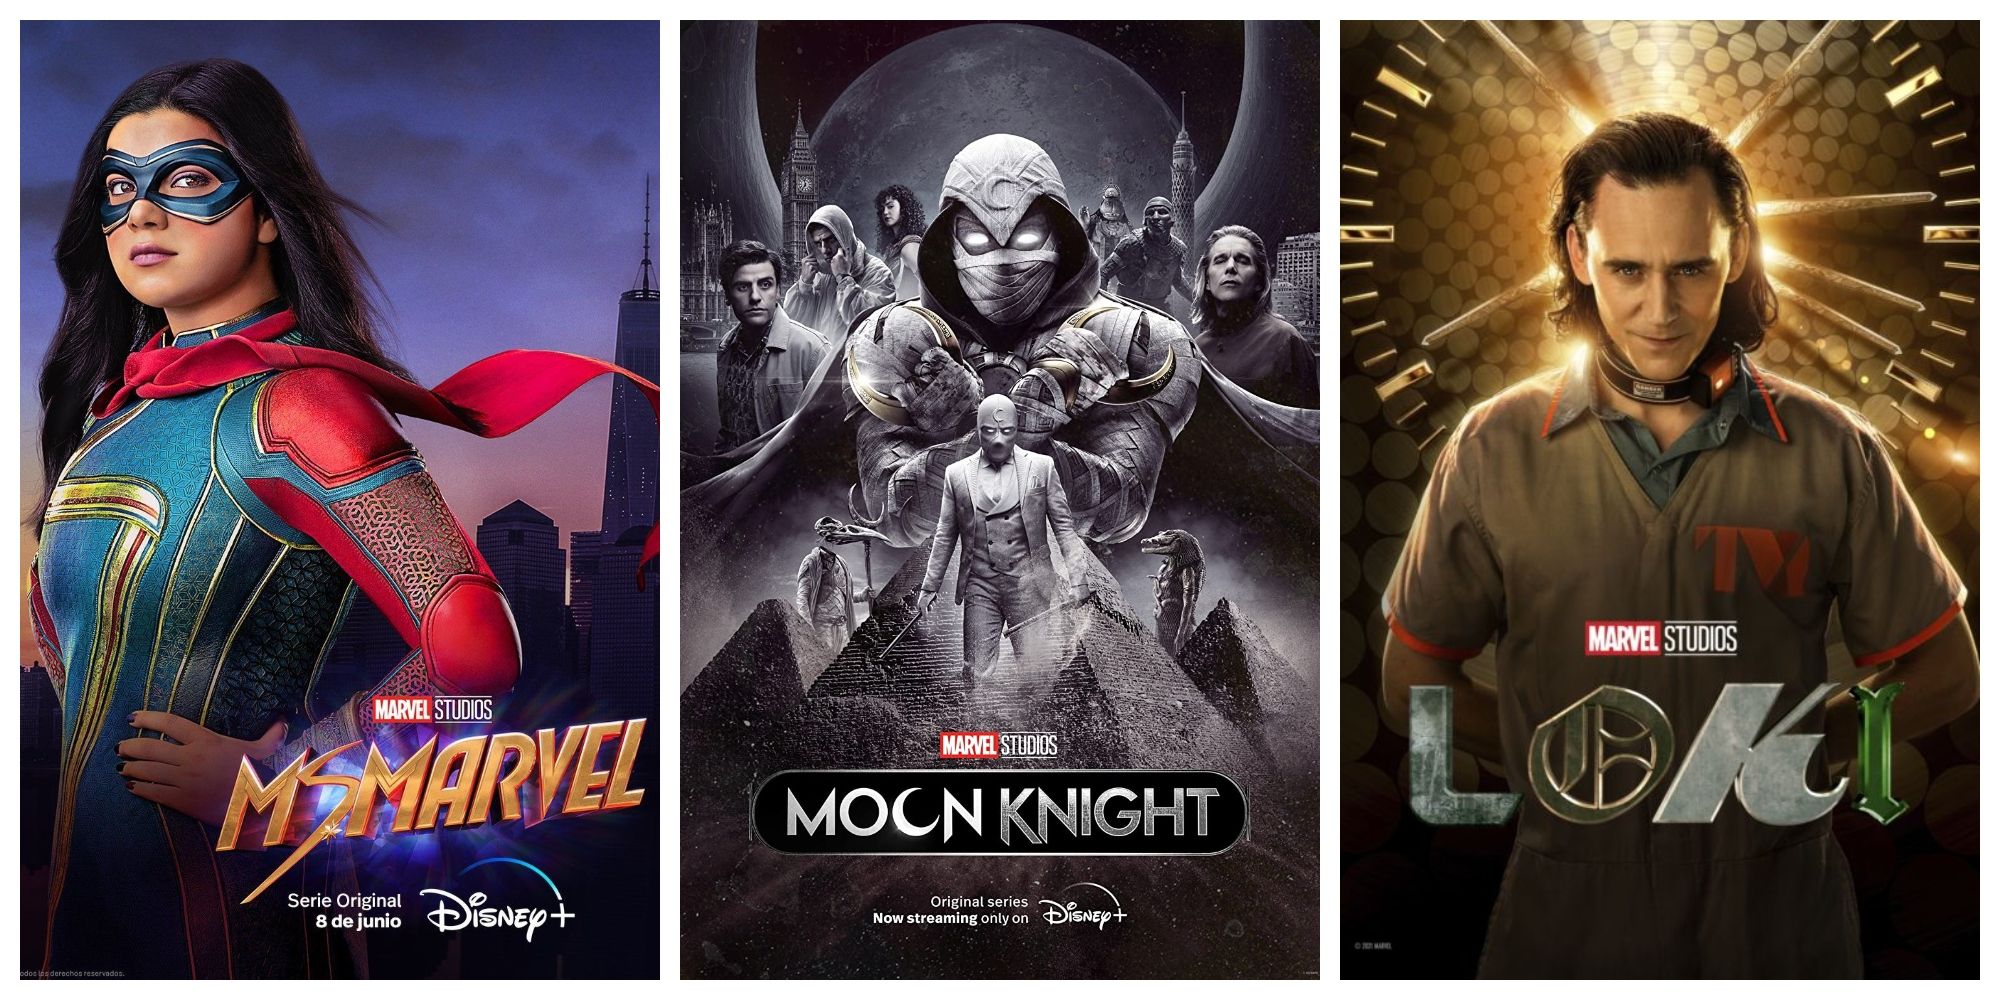 A split image of promotional posters for Ms Marvel, Moon Knight, and Loki on Disney+